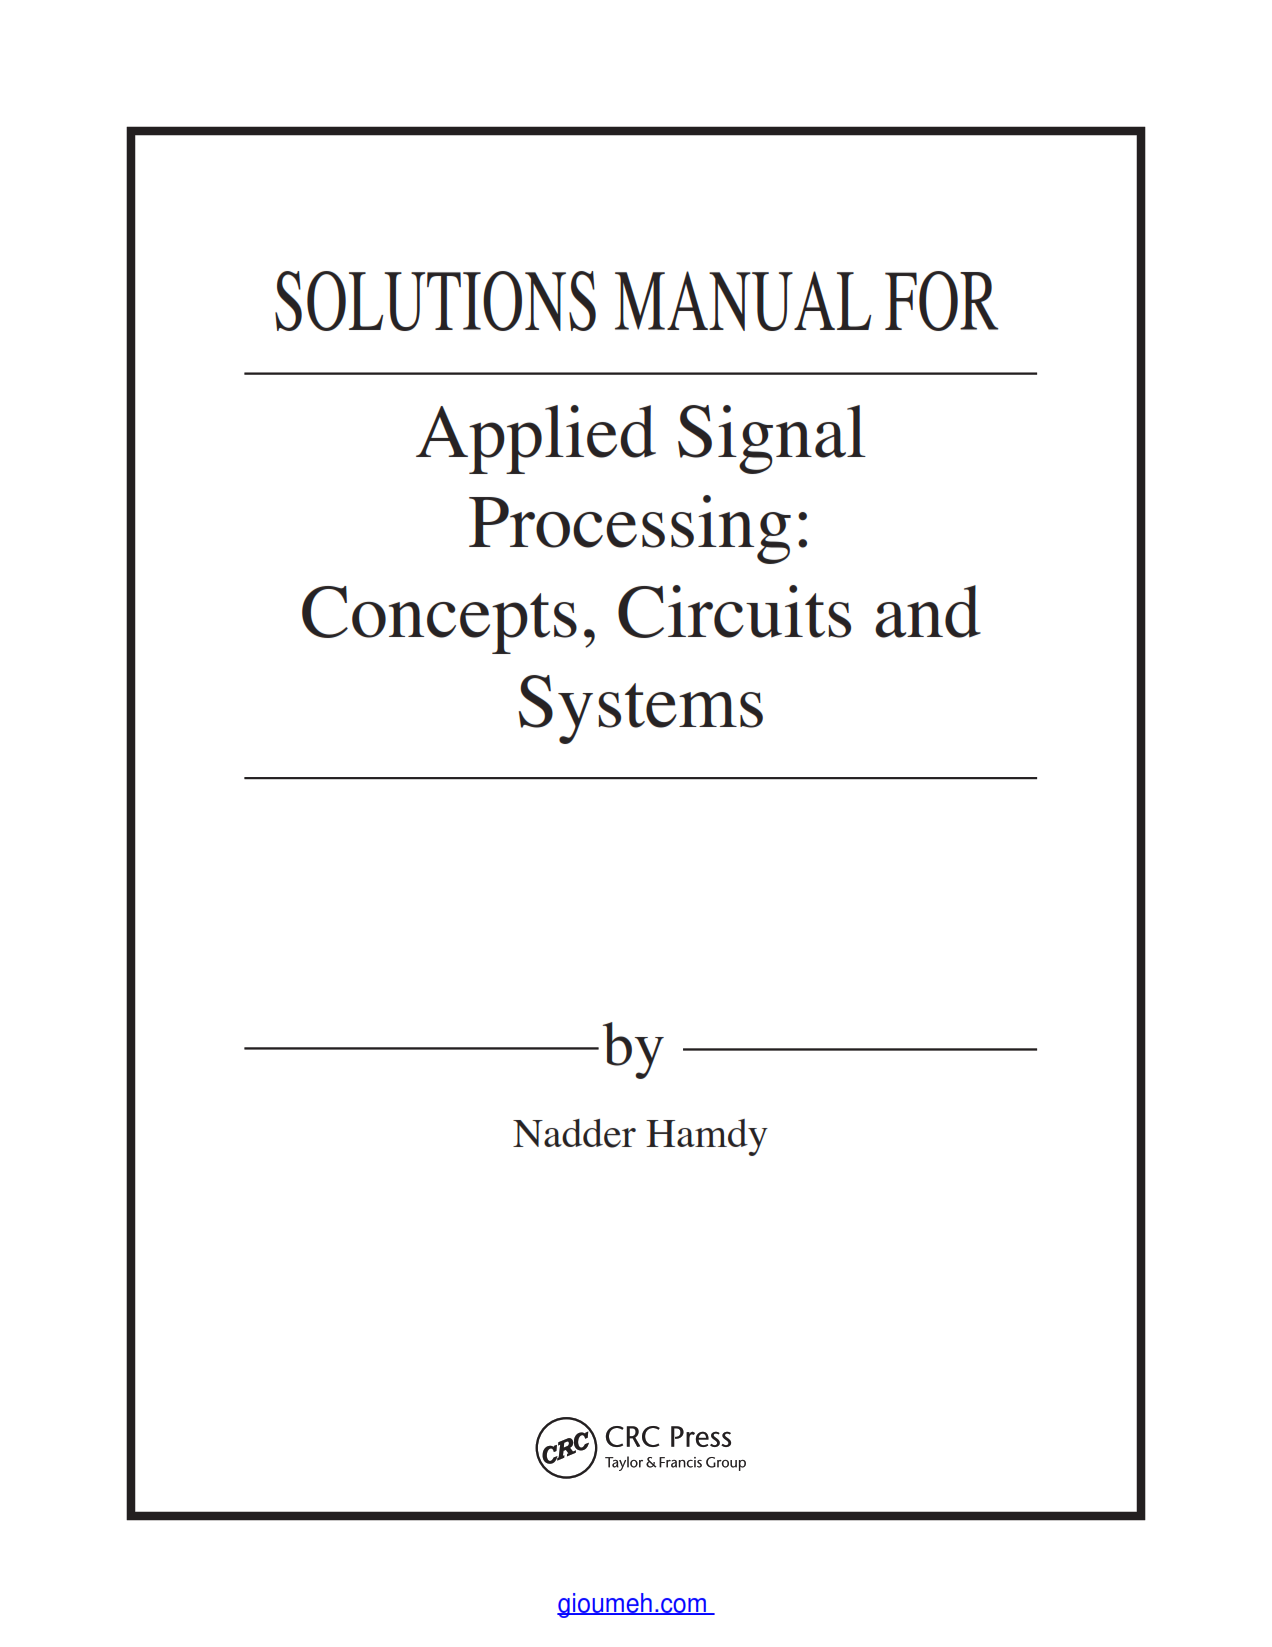 Download free Applied Signal Processing Concepts Circuits and Systems by Nadder Hamdy solution manual eBook pdf | gioumeh solutions